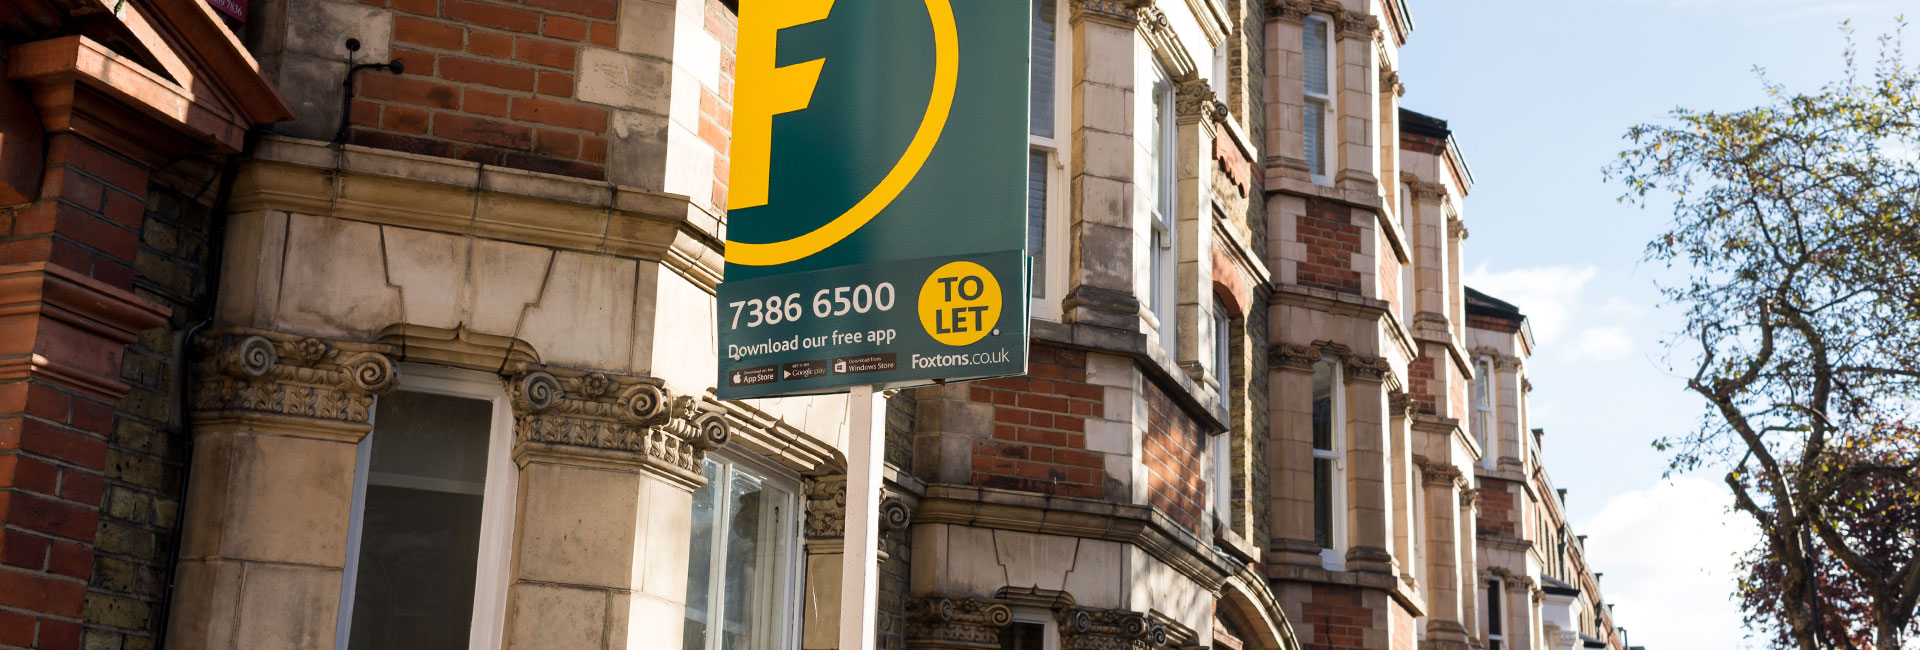 UK lettings market report - To let board